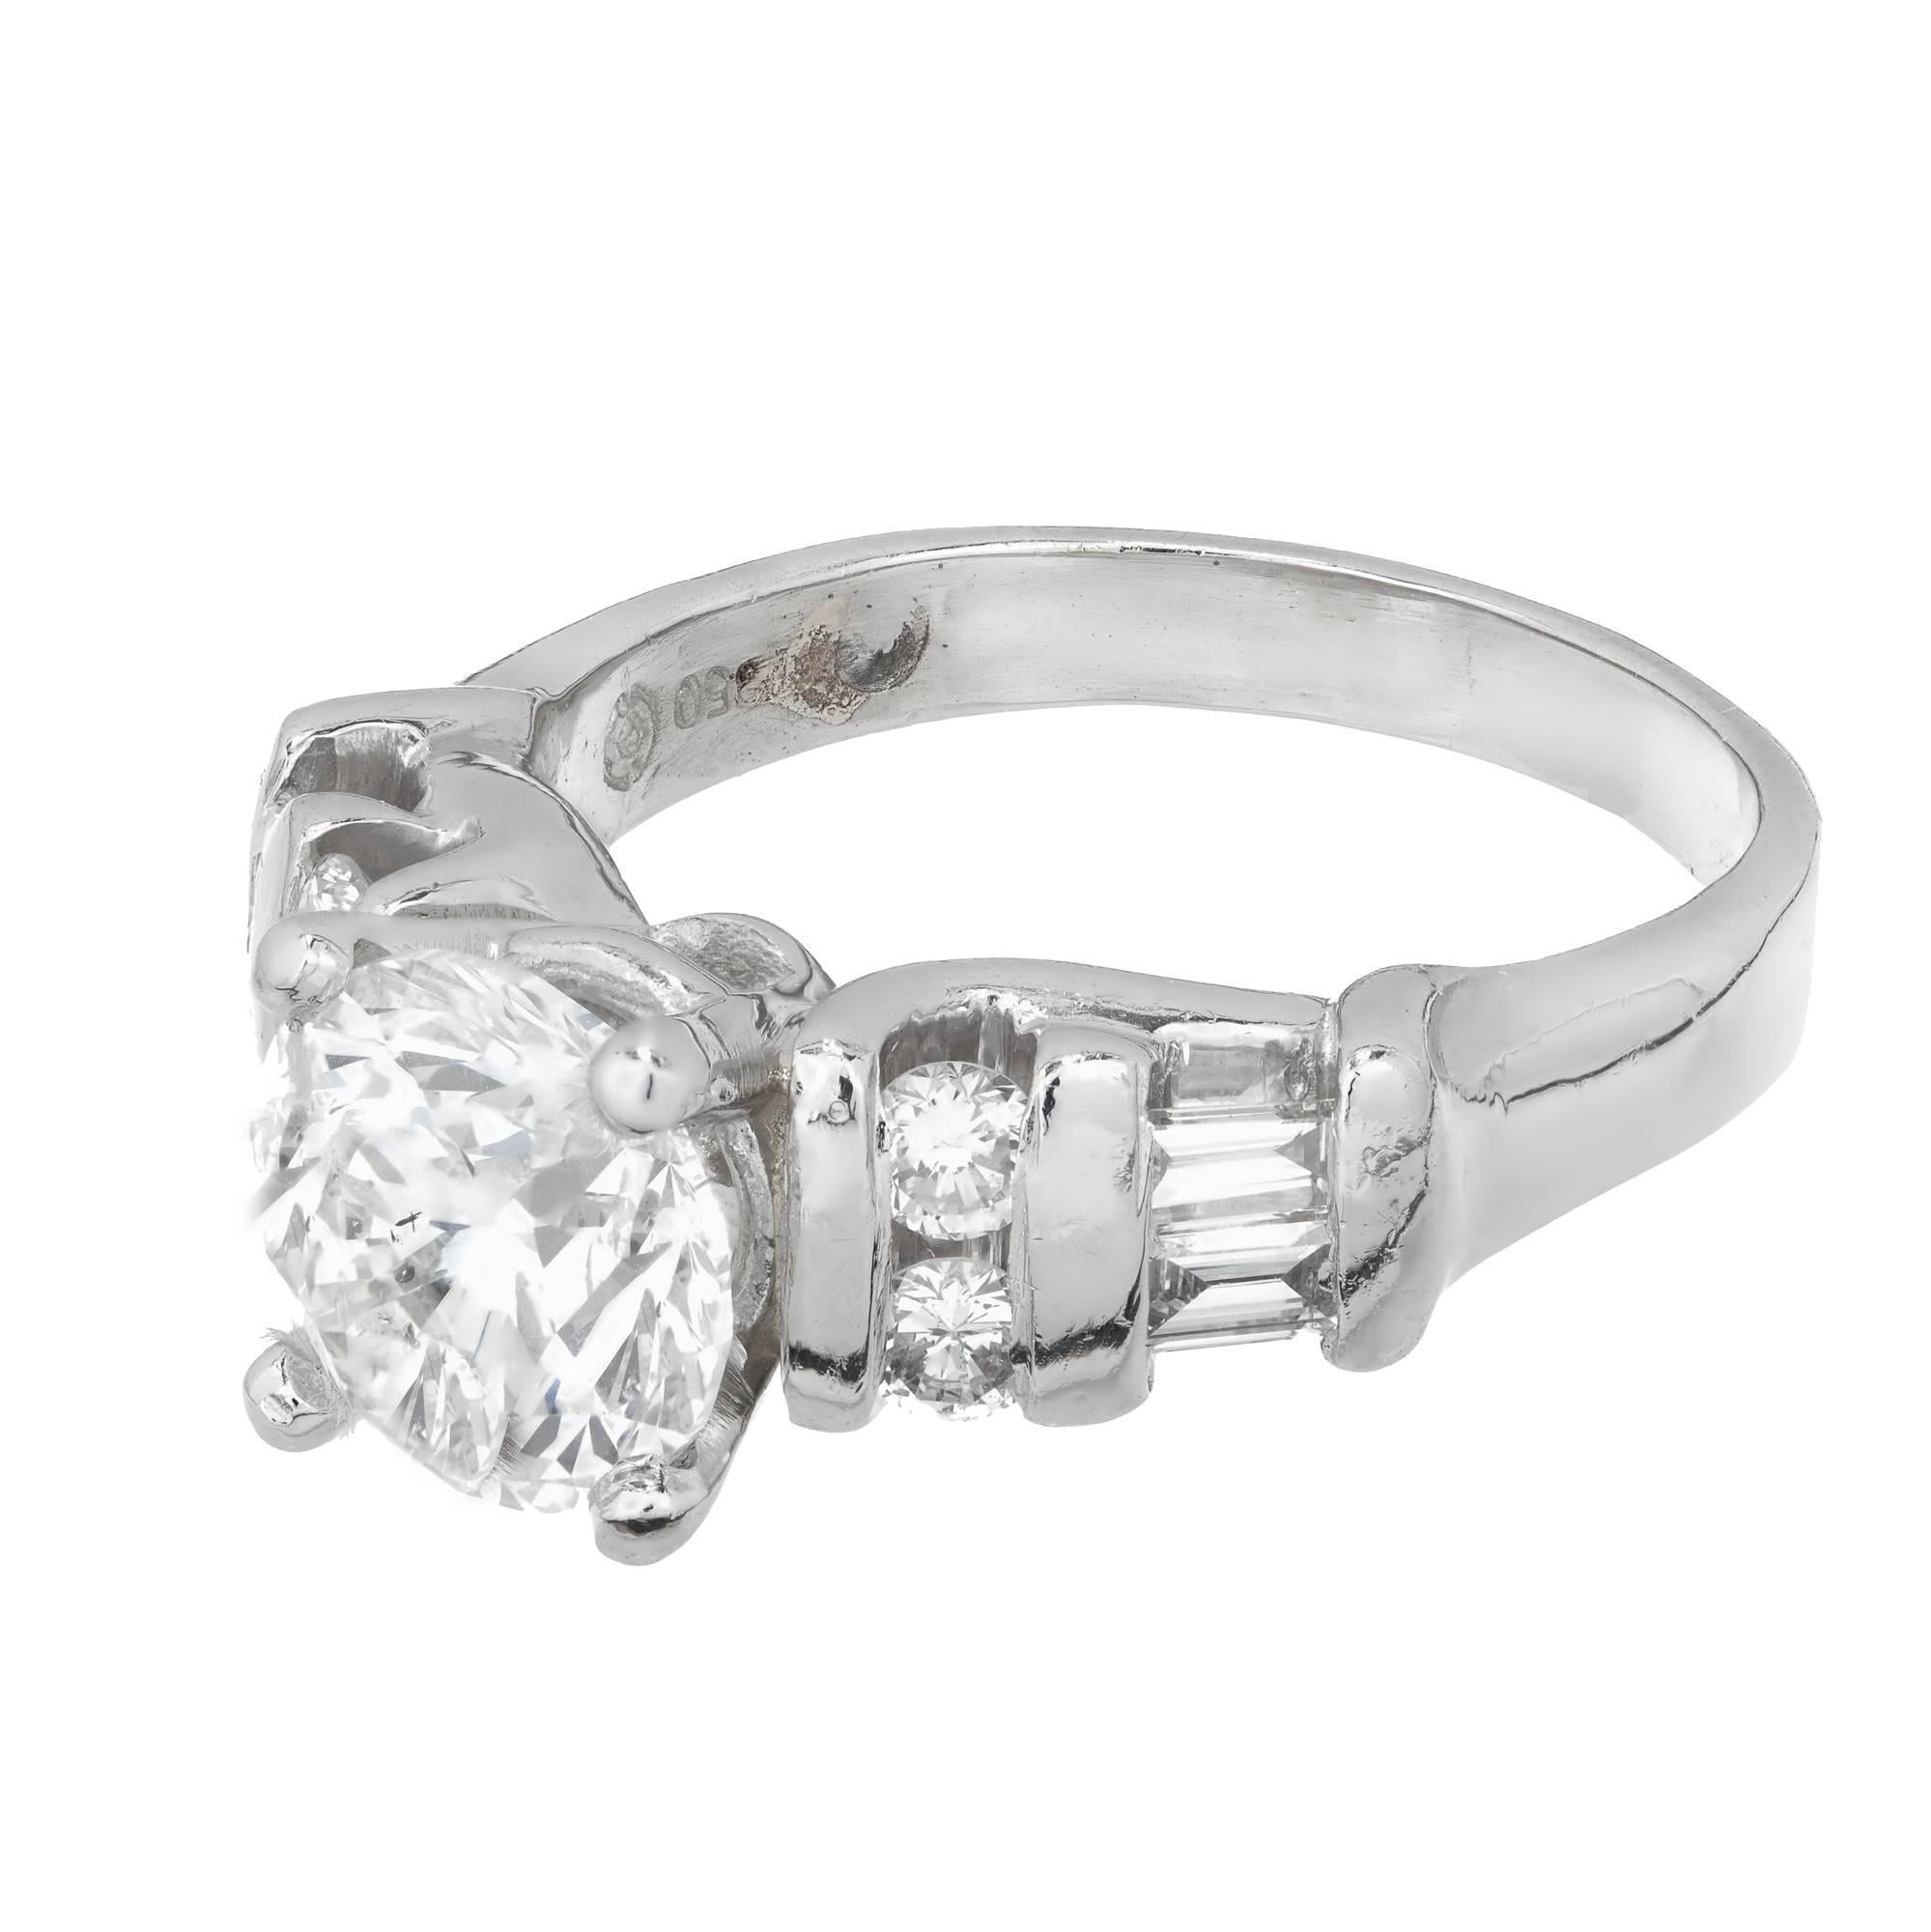 EGL certified diamond engagement ring accented by round and baguette diamonds in a platinum setting. The sides are fairly low to the finger. The center diamond is raised just enough to sparkle.

 Diamond, approx. total weight 2.00cts, G, SI3, 7.92 x